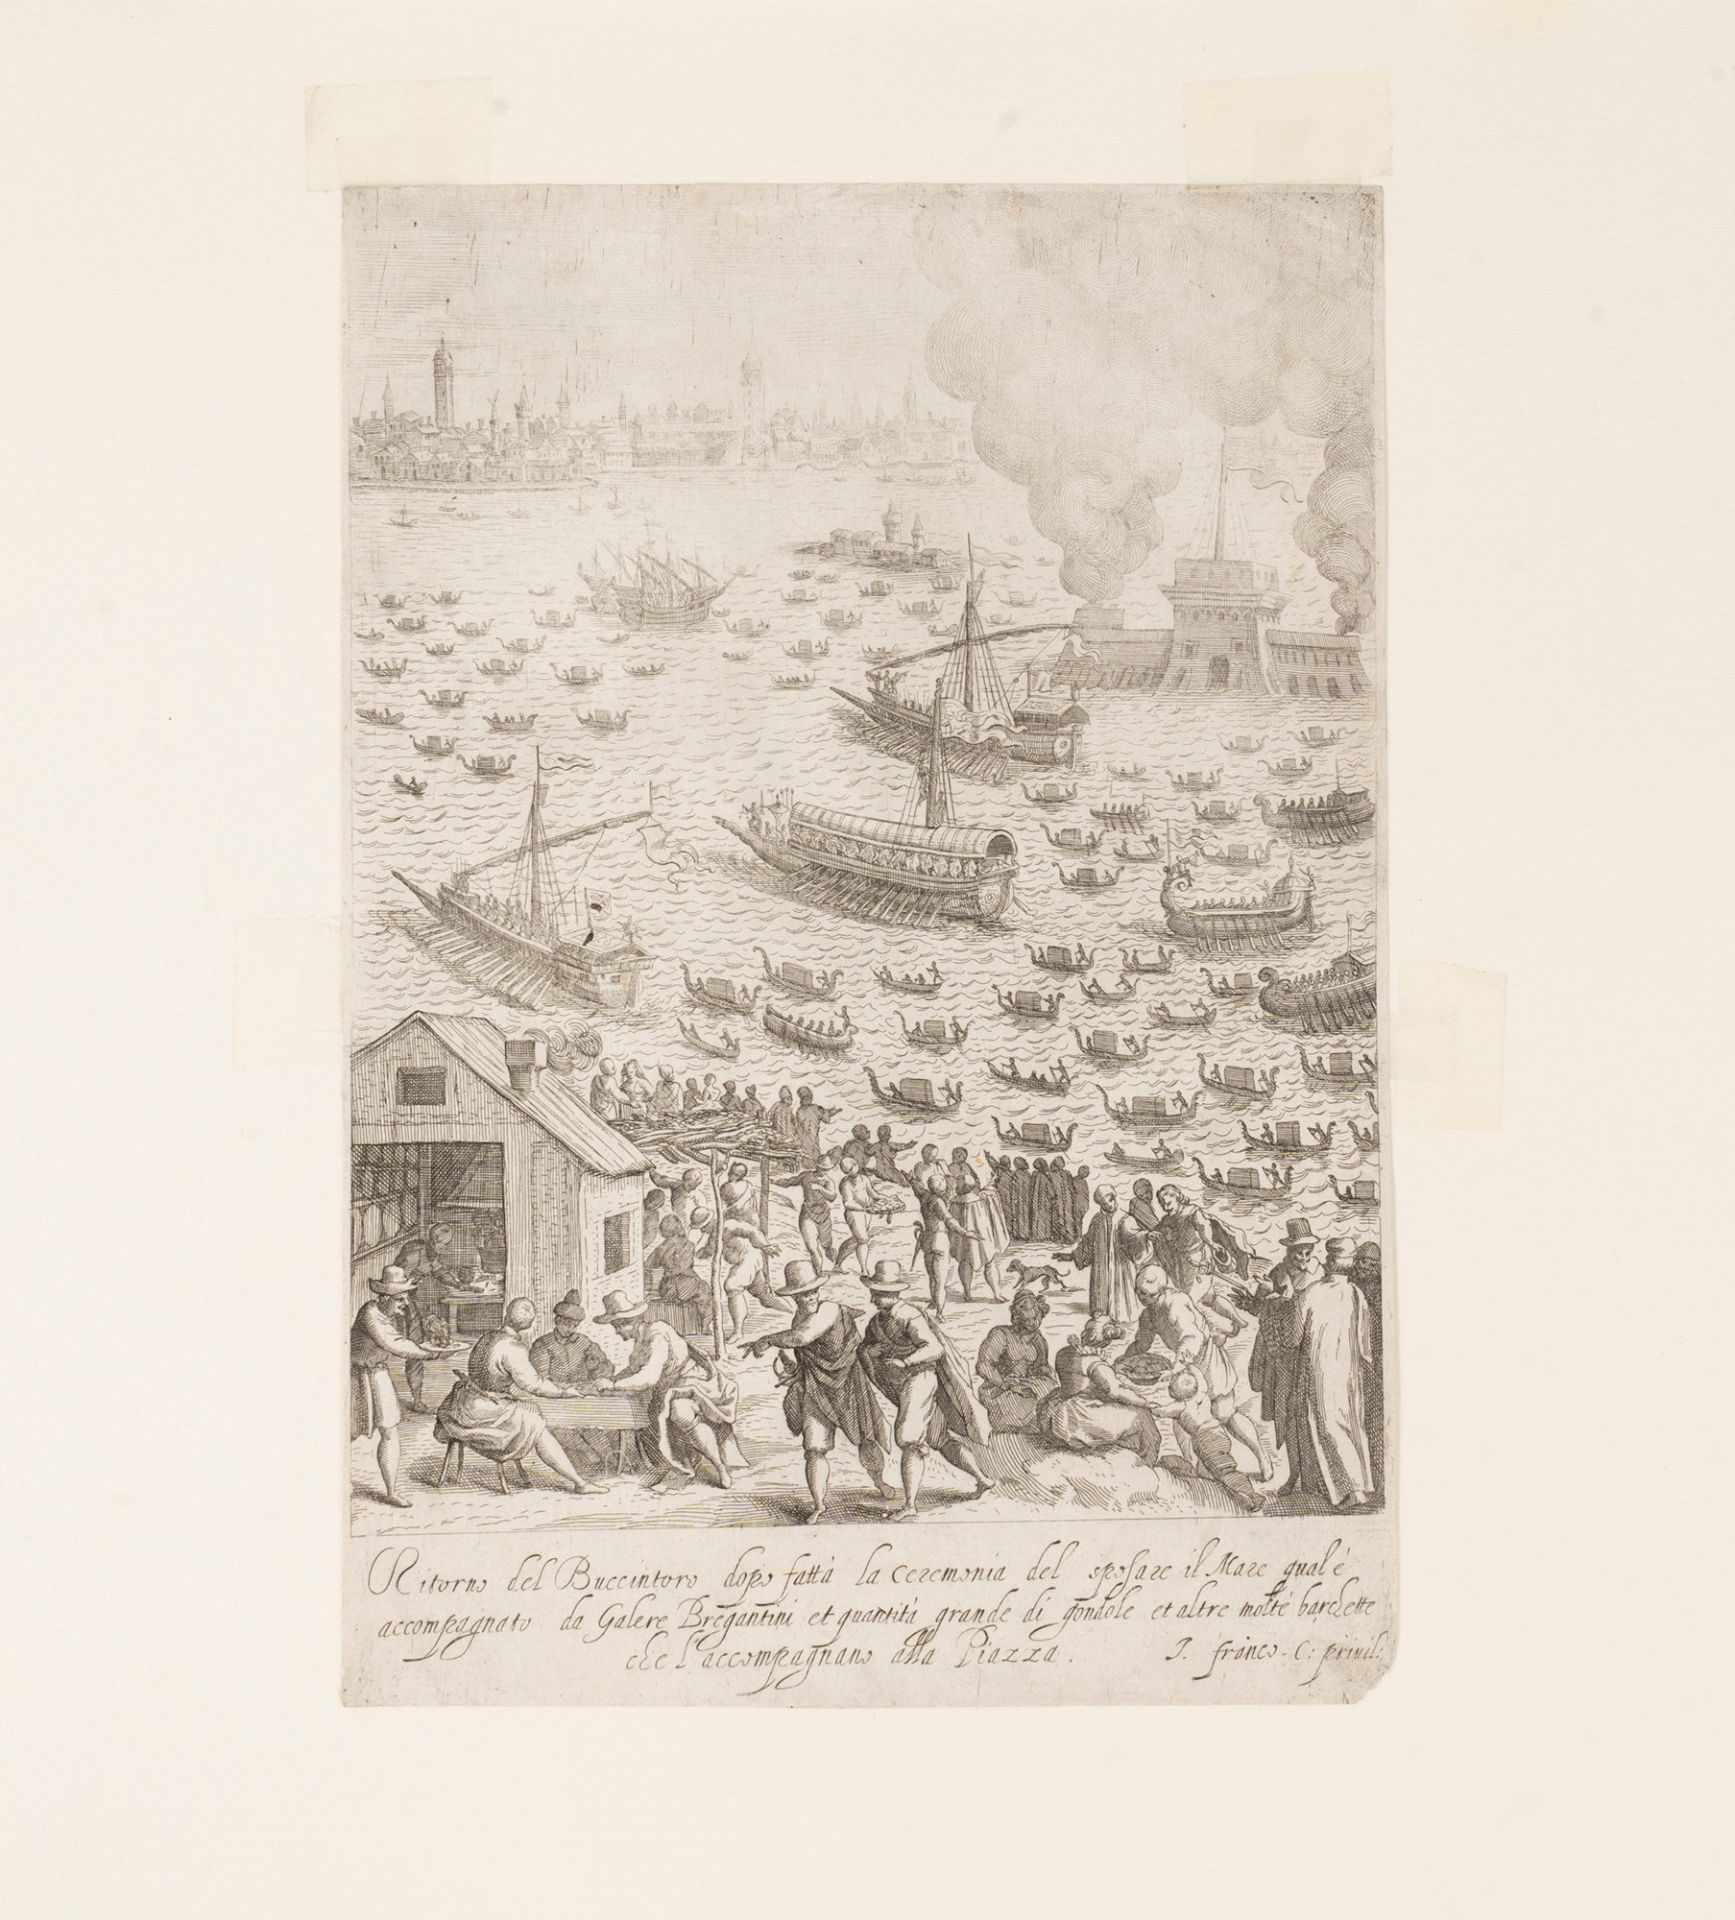 The return of the Bucintoro after having completed the ceremony of marrying the sea..., 1700 - Image 2 of 2